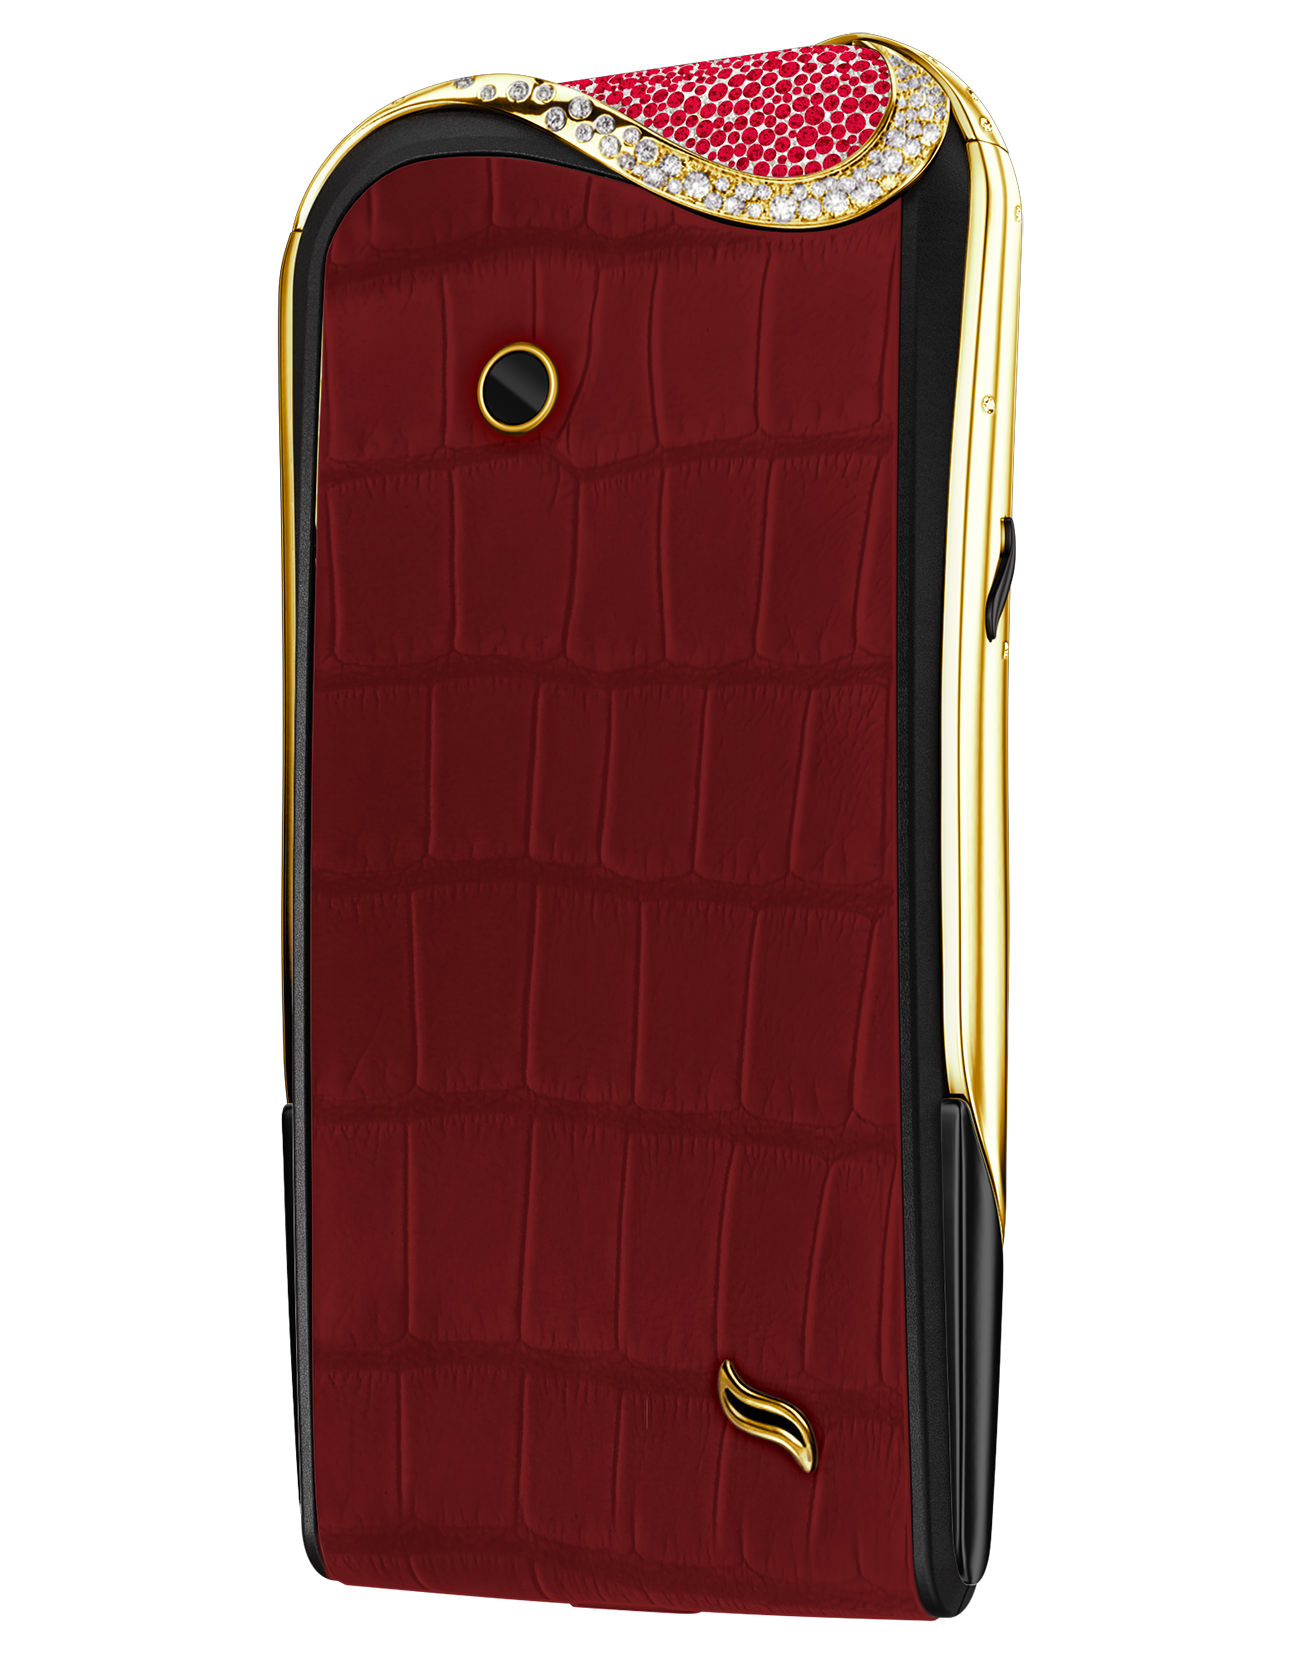 Savelli-Ruby-Limited-Edition-4